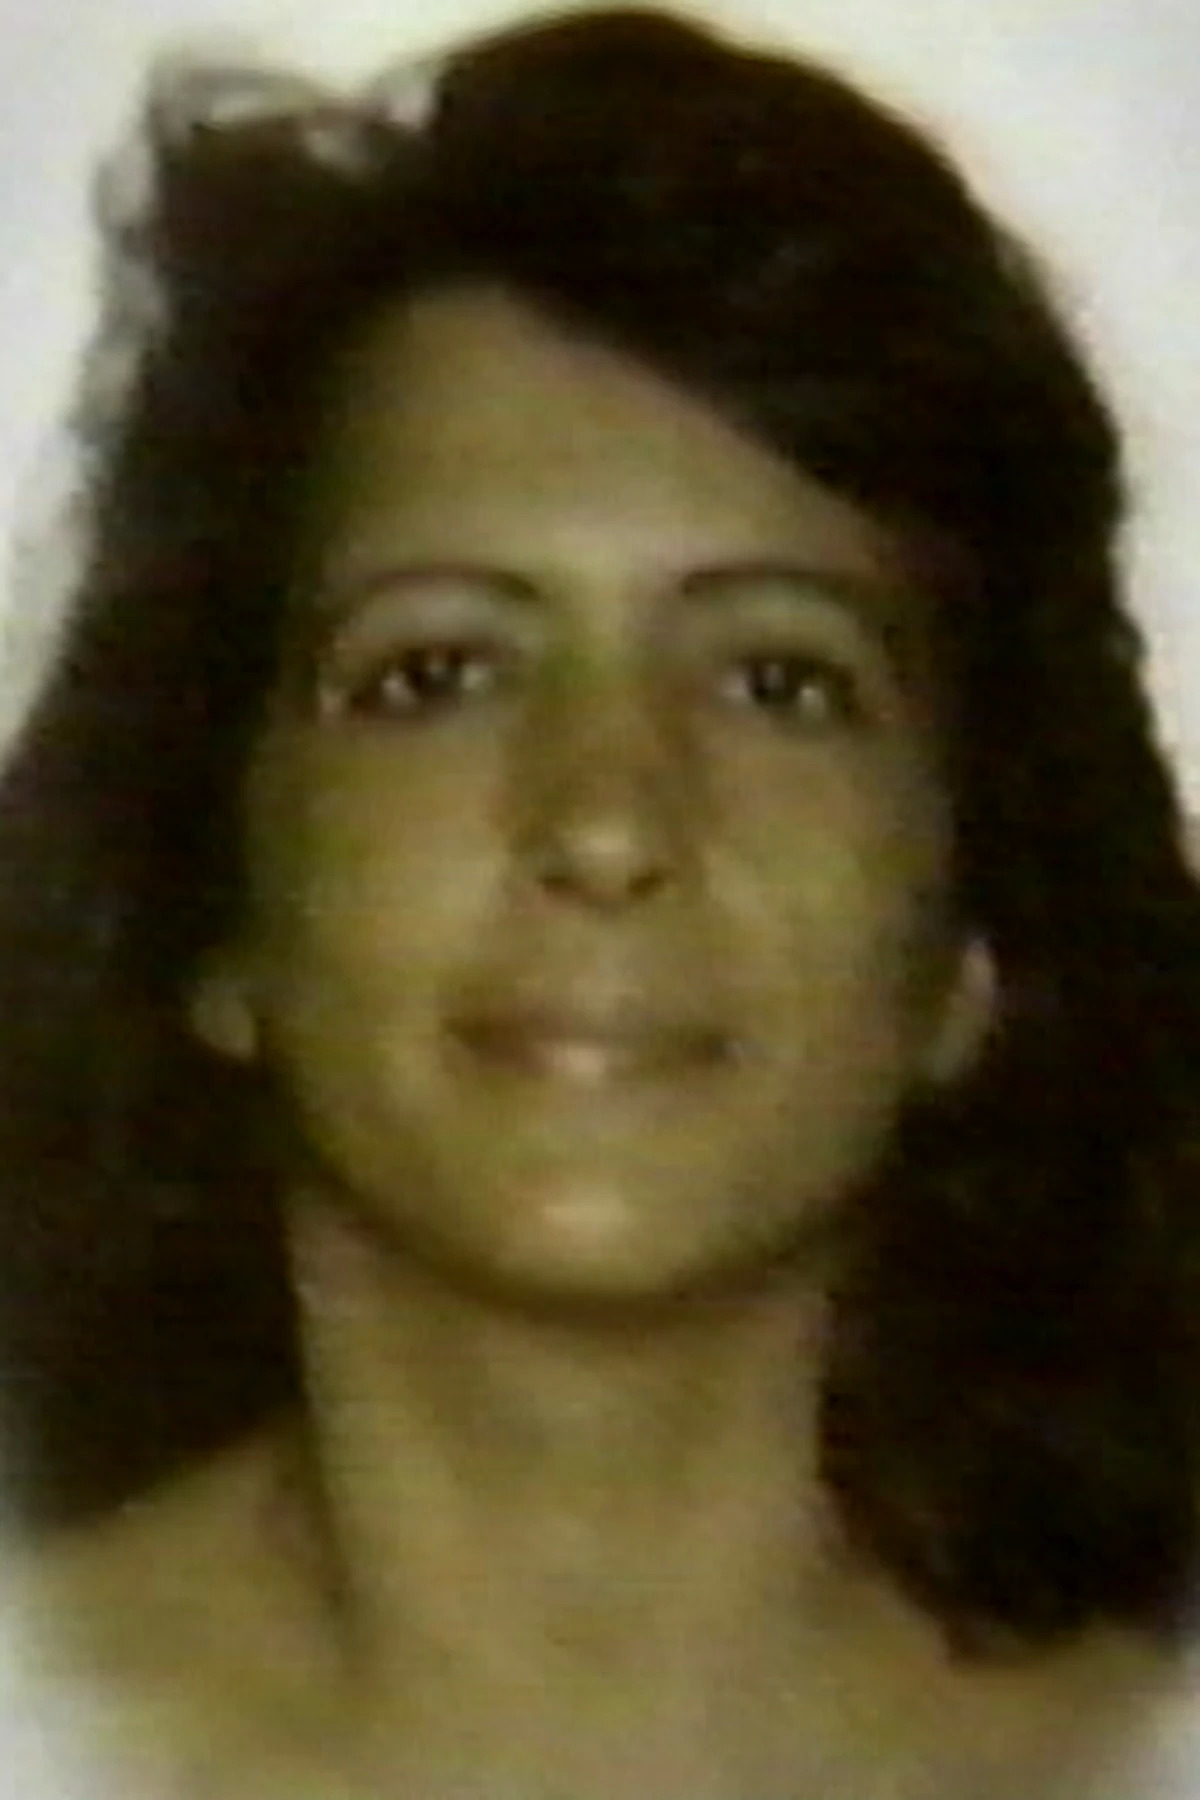 [IMAGE] It took DNA detective just 2 days to identify alleged killer in 1994 Waikiki cold case